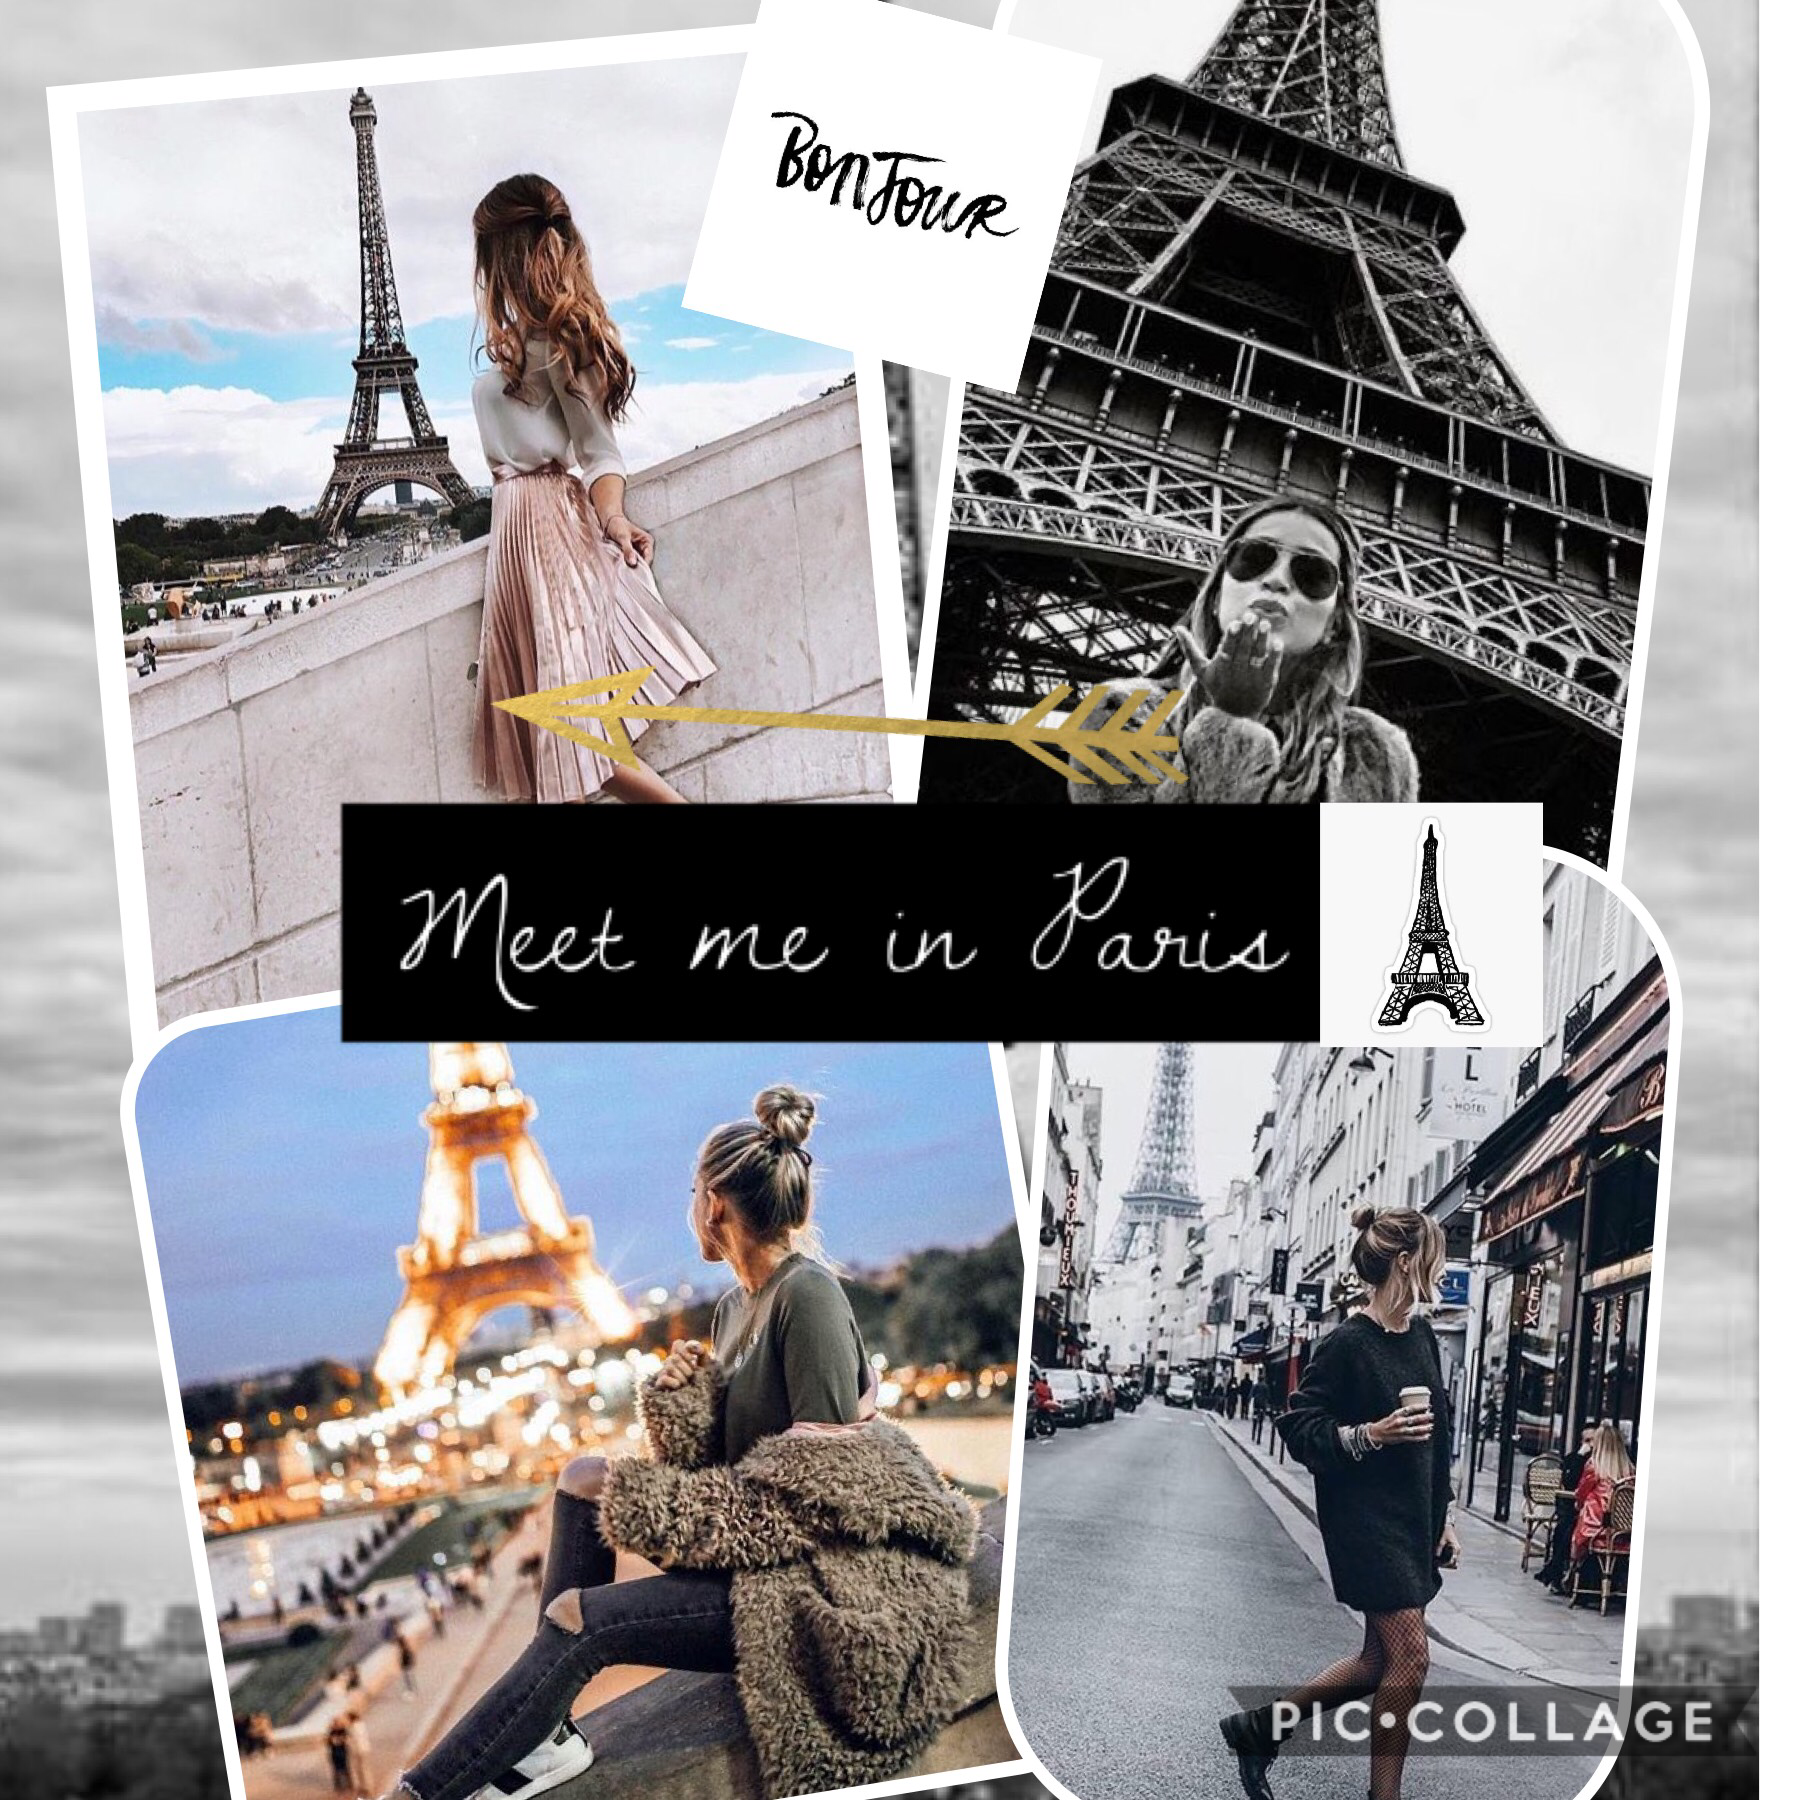 🖤tap🖤
 •Meet me In Paris•
Comment all black and white emojis 🖤